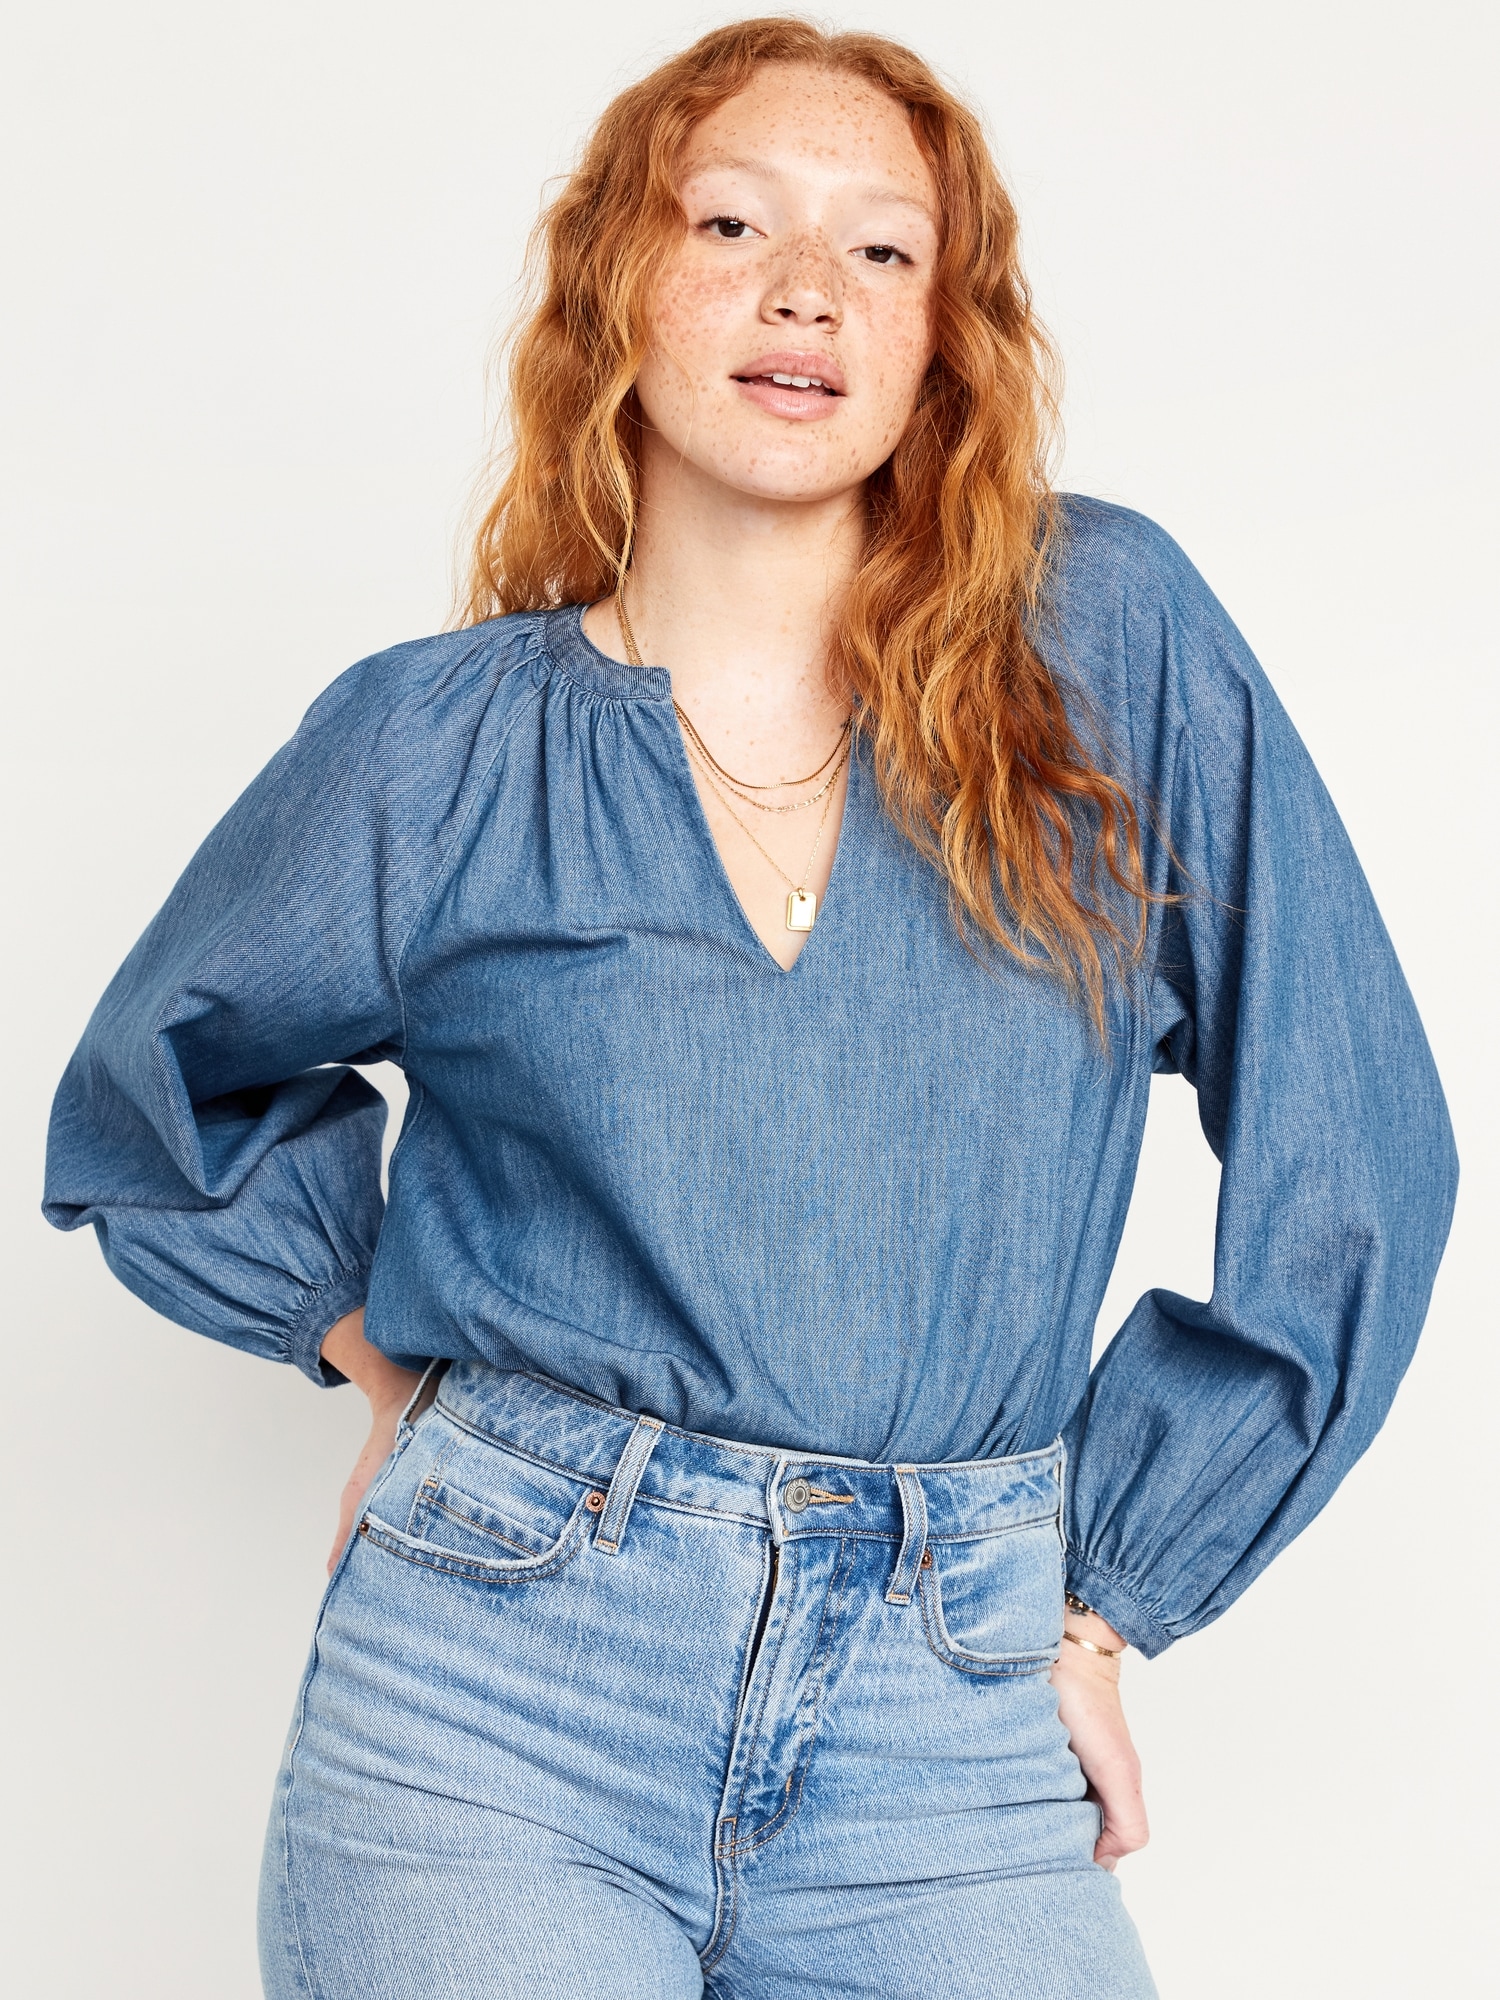 Long-Sleeve Chambray Top Hot Deal